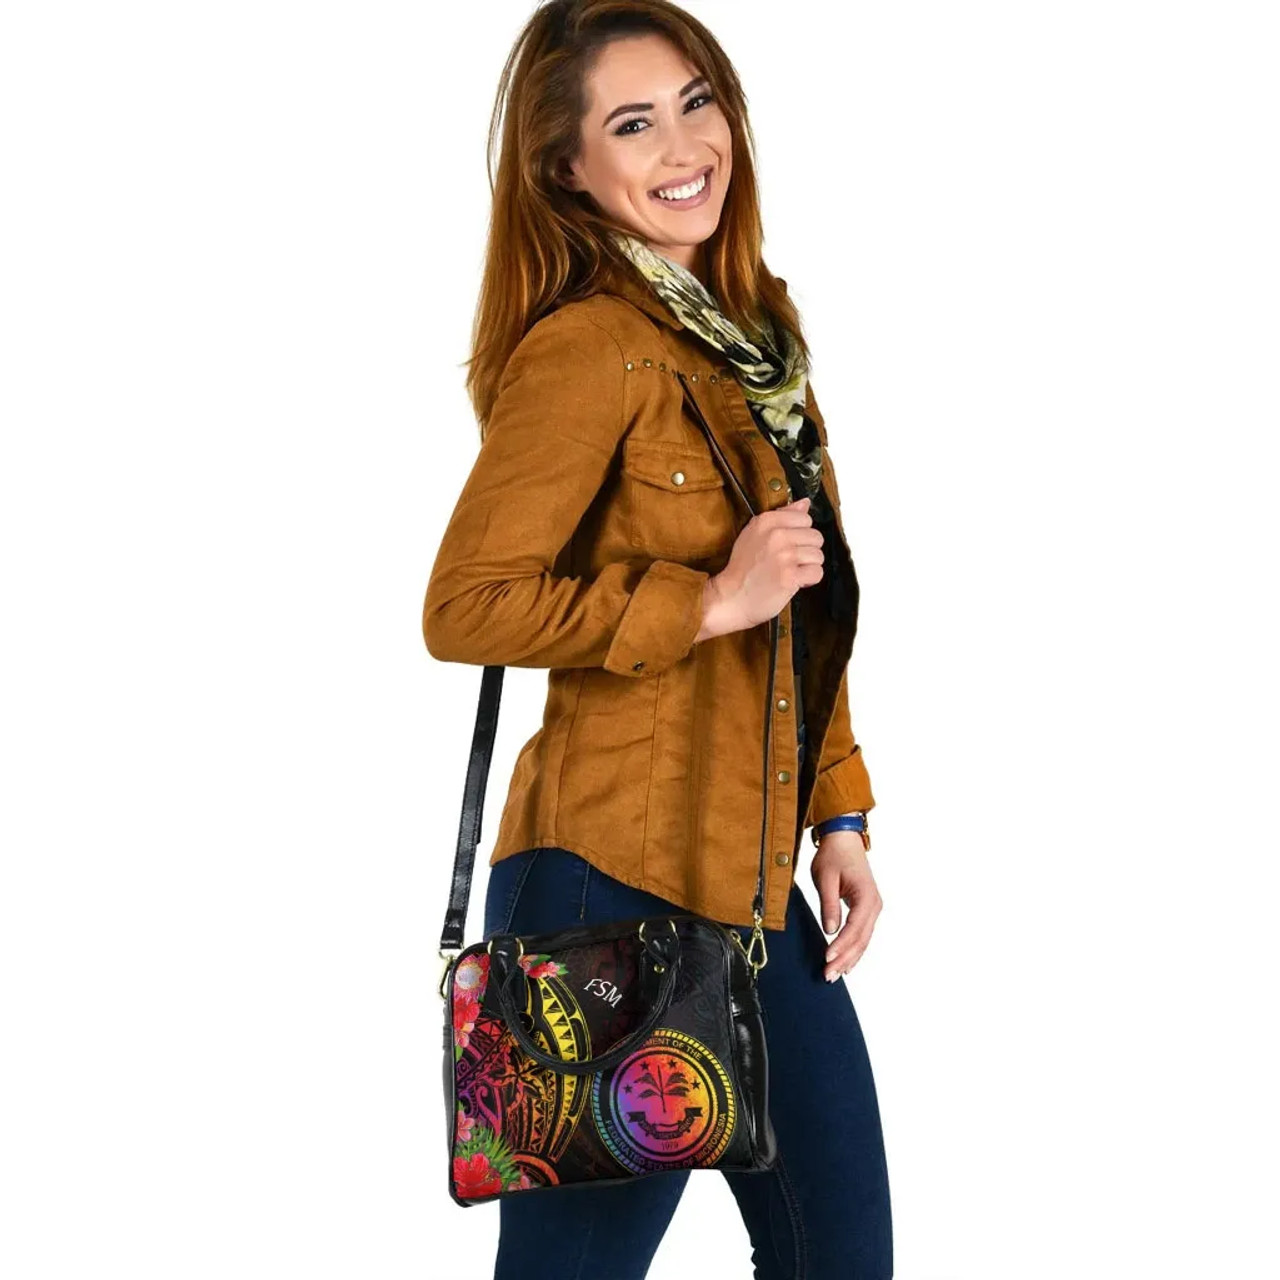 Federated States Of Micronesia Shoulder Handbag - Tropical Hippie Style 5